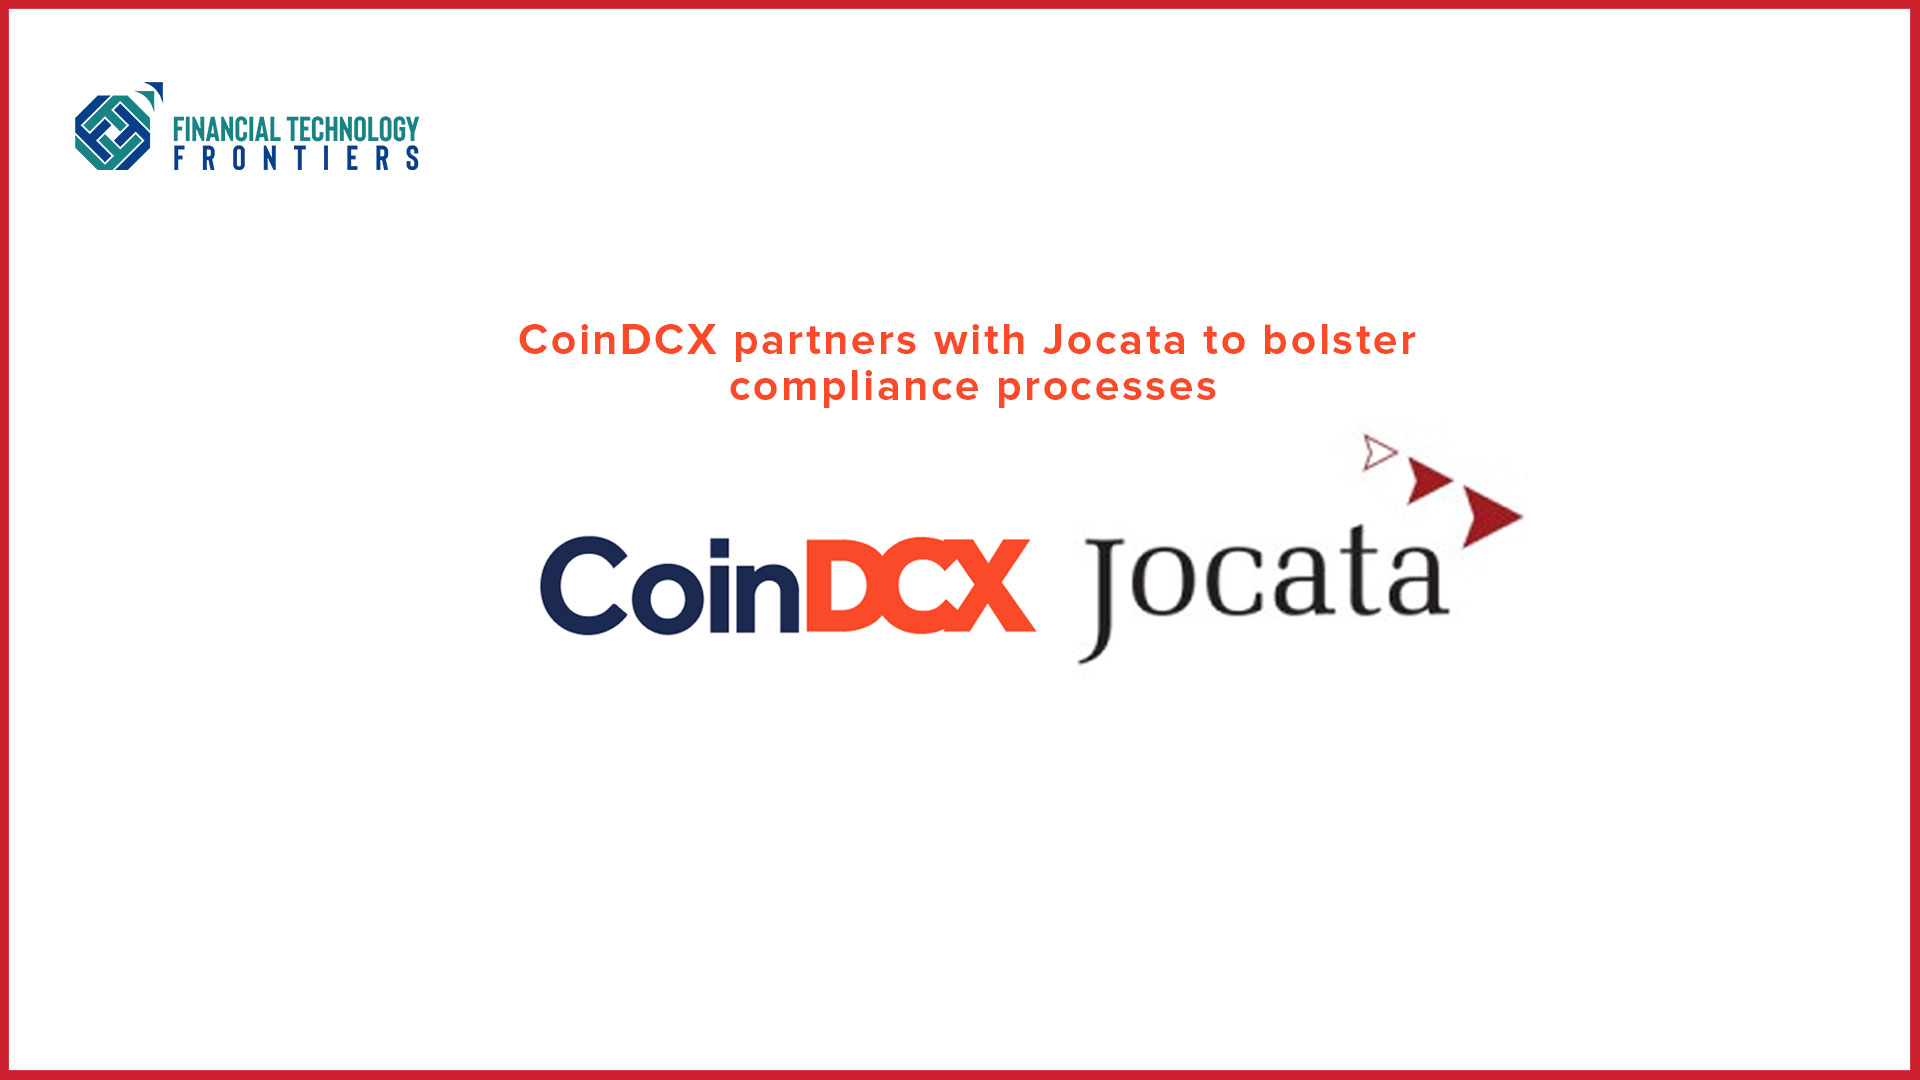 CoinDCX partners with Jocata to bolster compliance processes